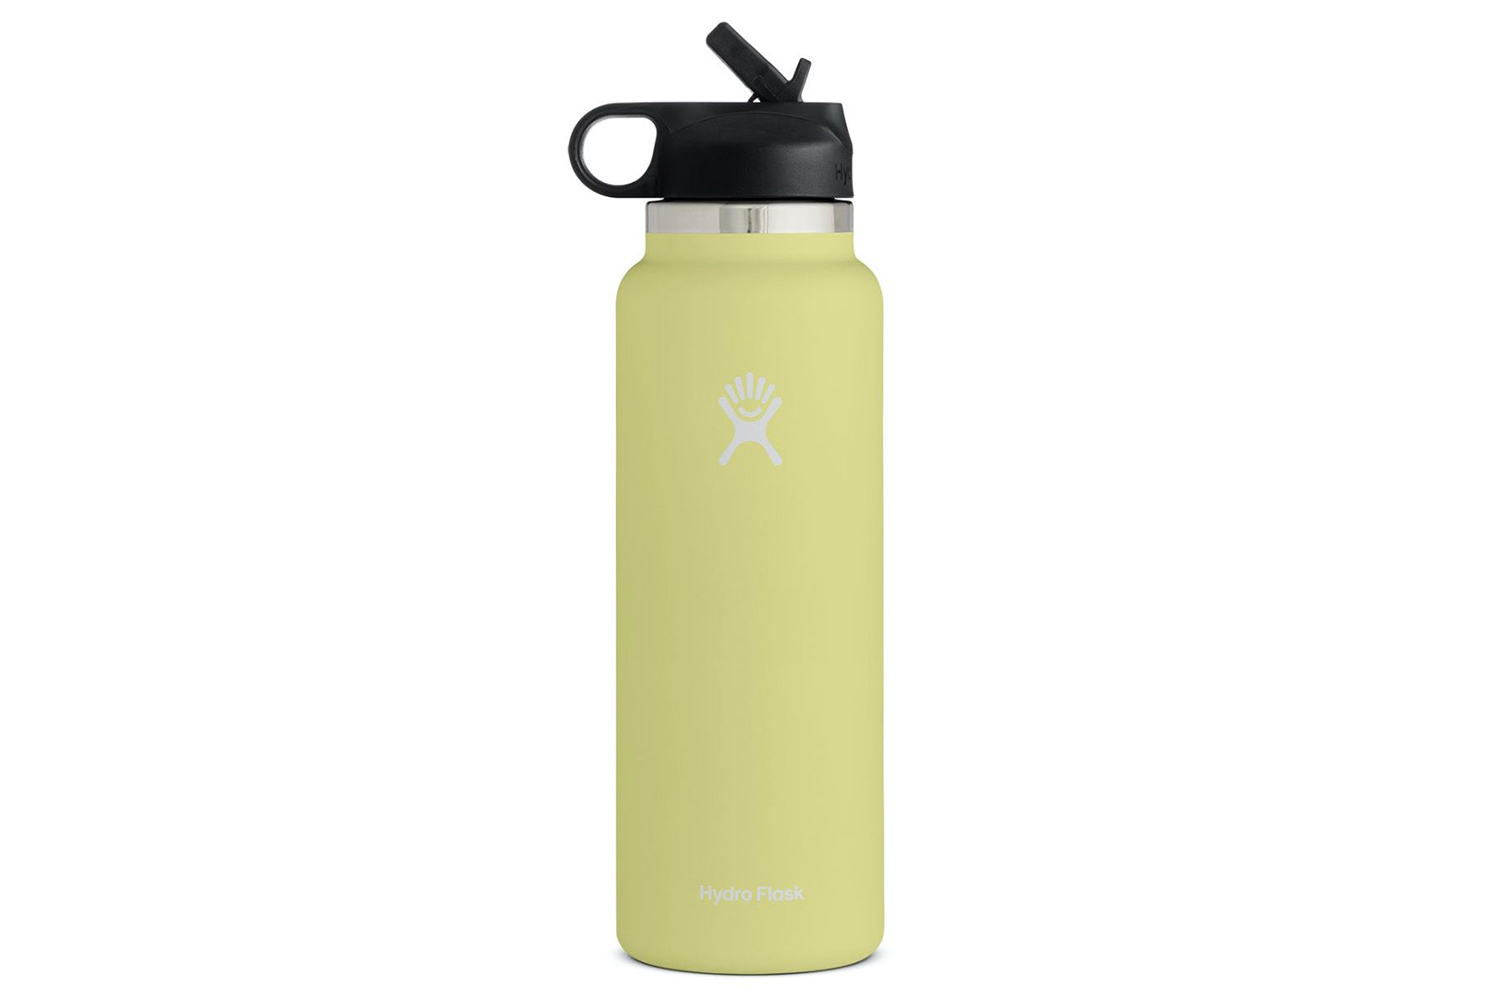 https://www.themanual.com/wp-content/uploads/sites/9/2021/02/wide-mouth-straw-lid-hydro-flask-pineapple.jpg?fit=800%2C533&p=1